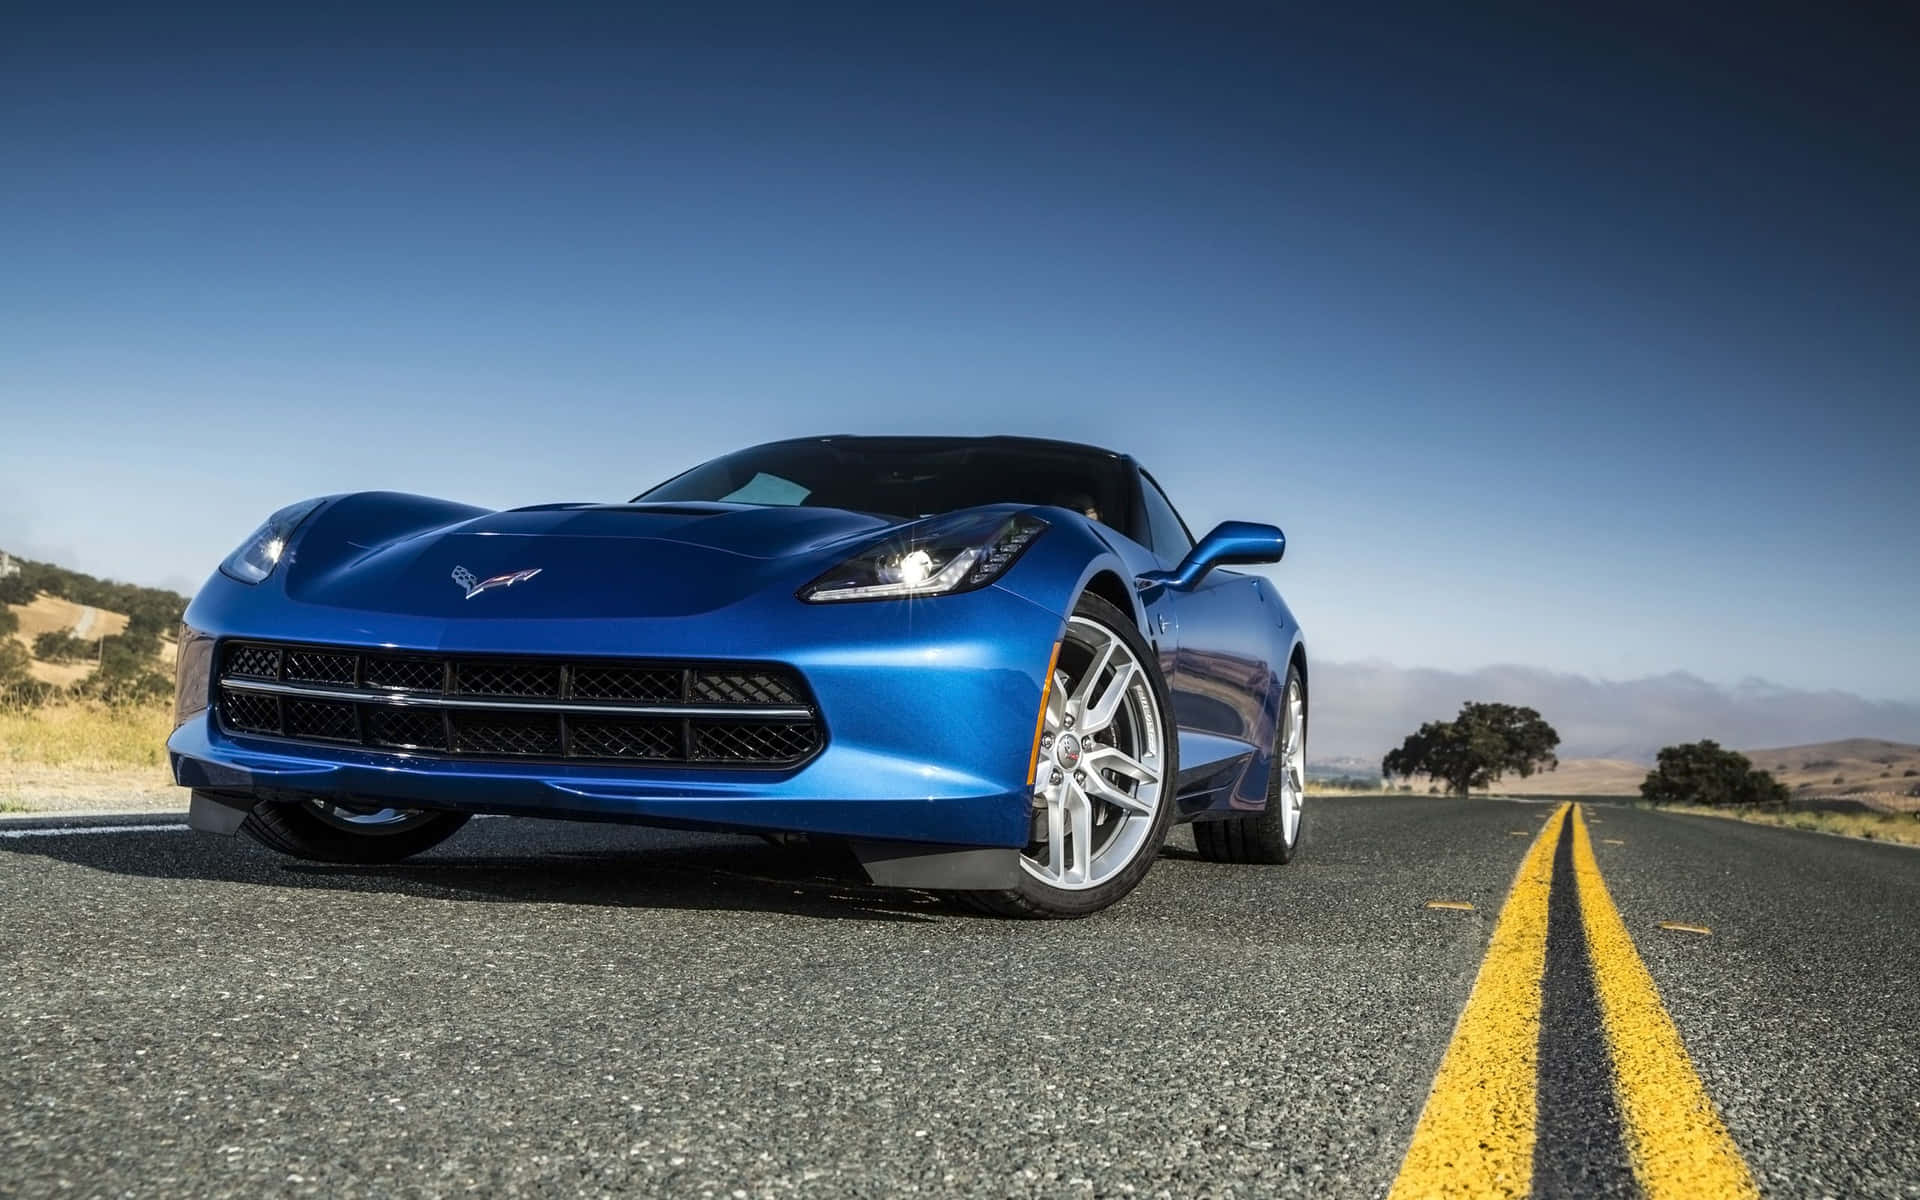 Showcasing a sleek and stylish design, this Chevrolet Corvette will turn heads